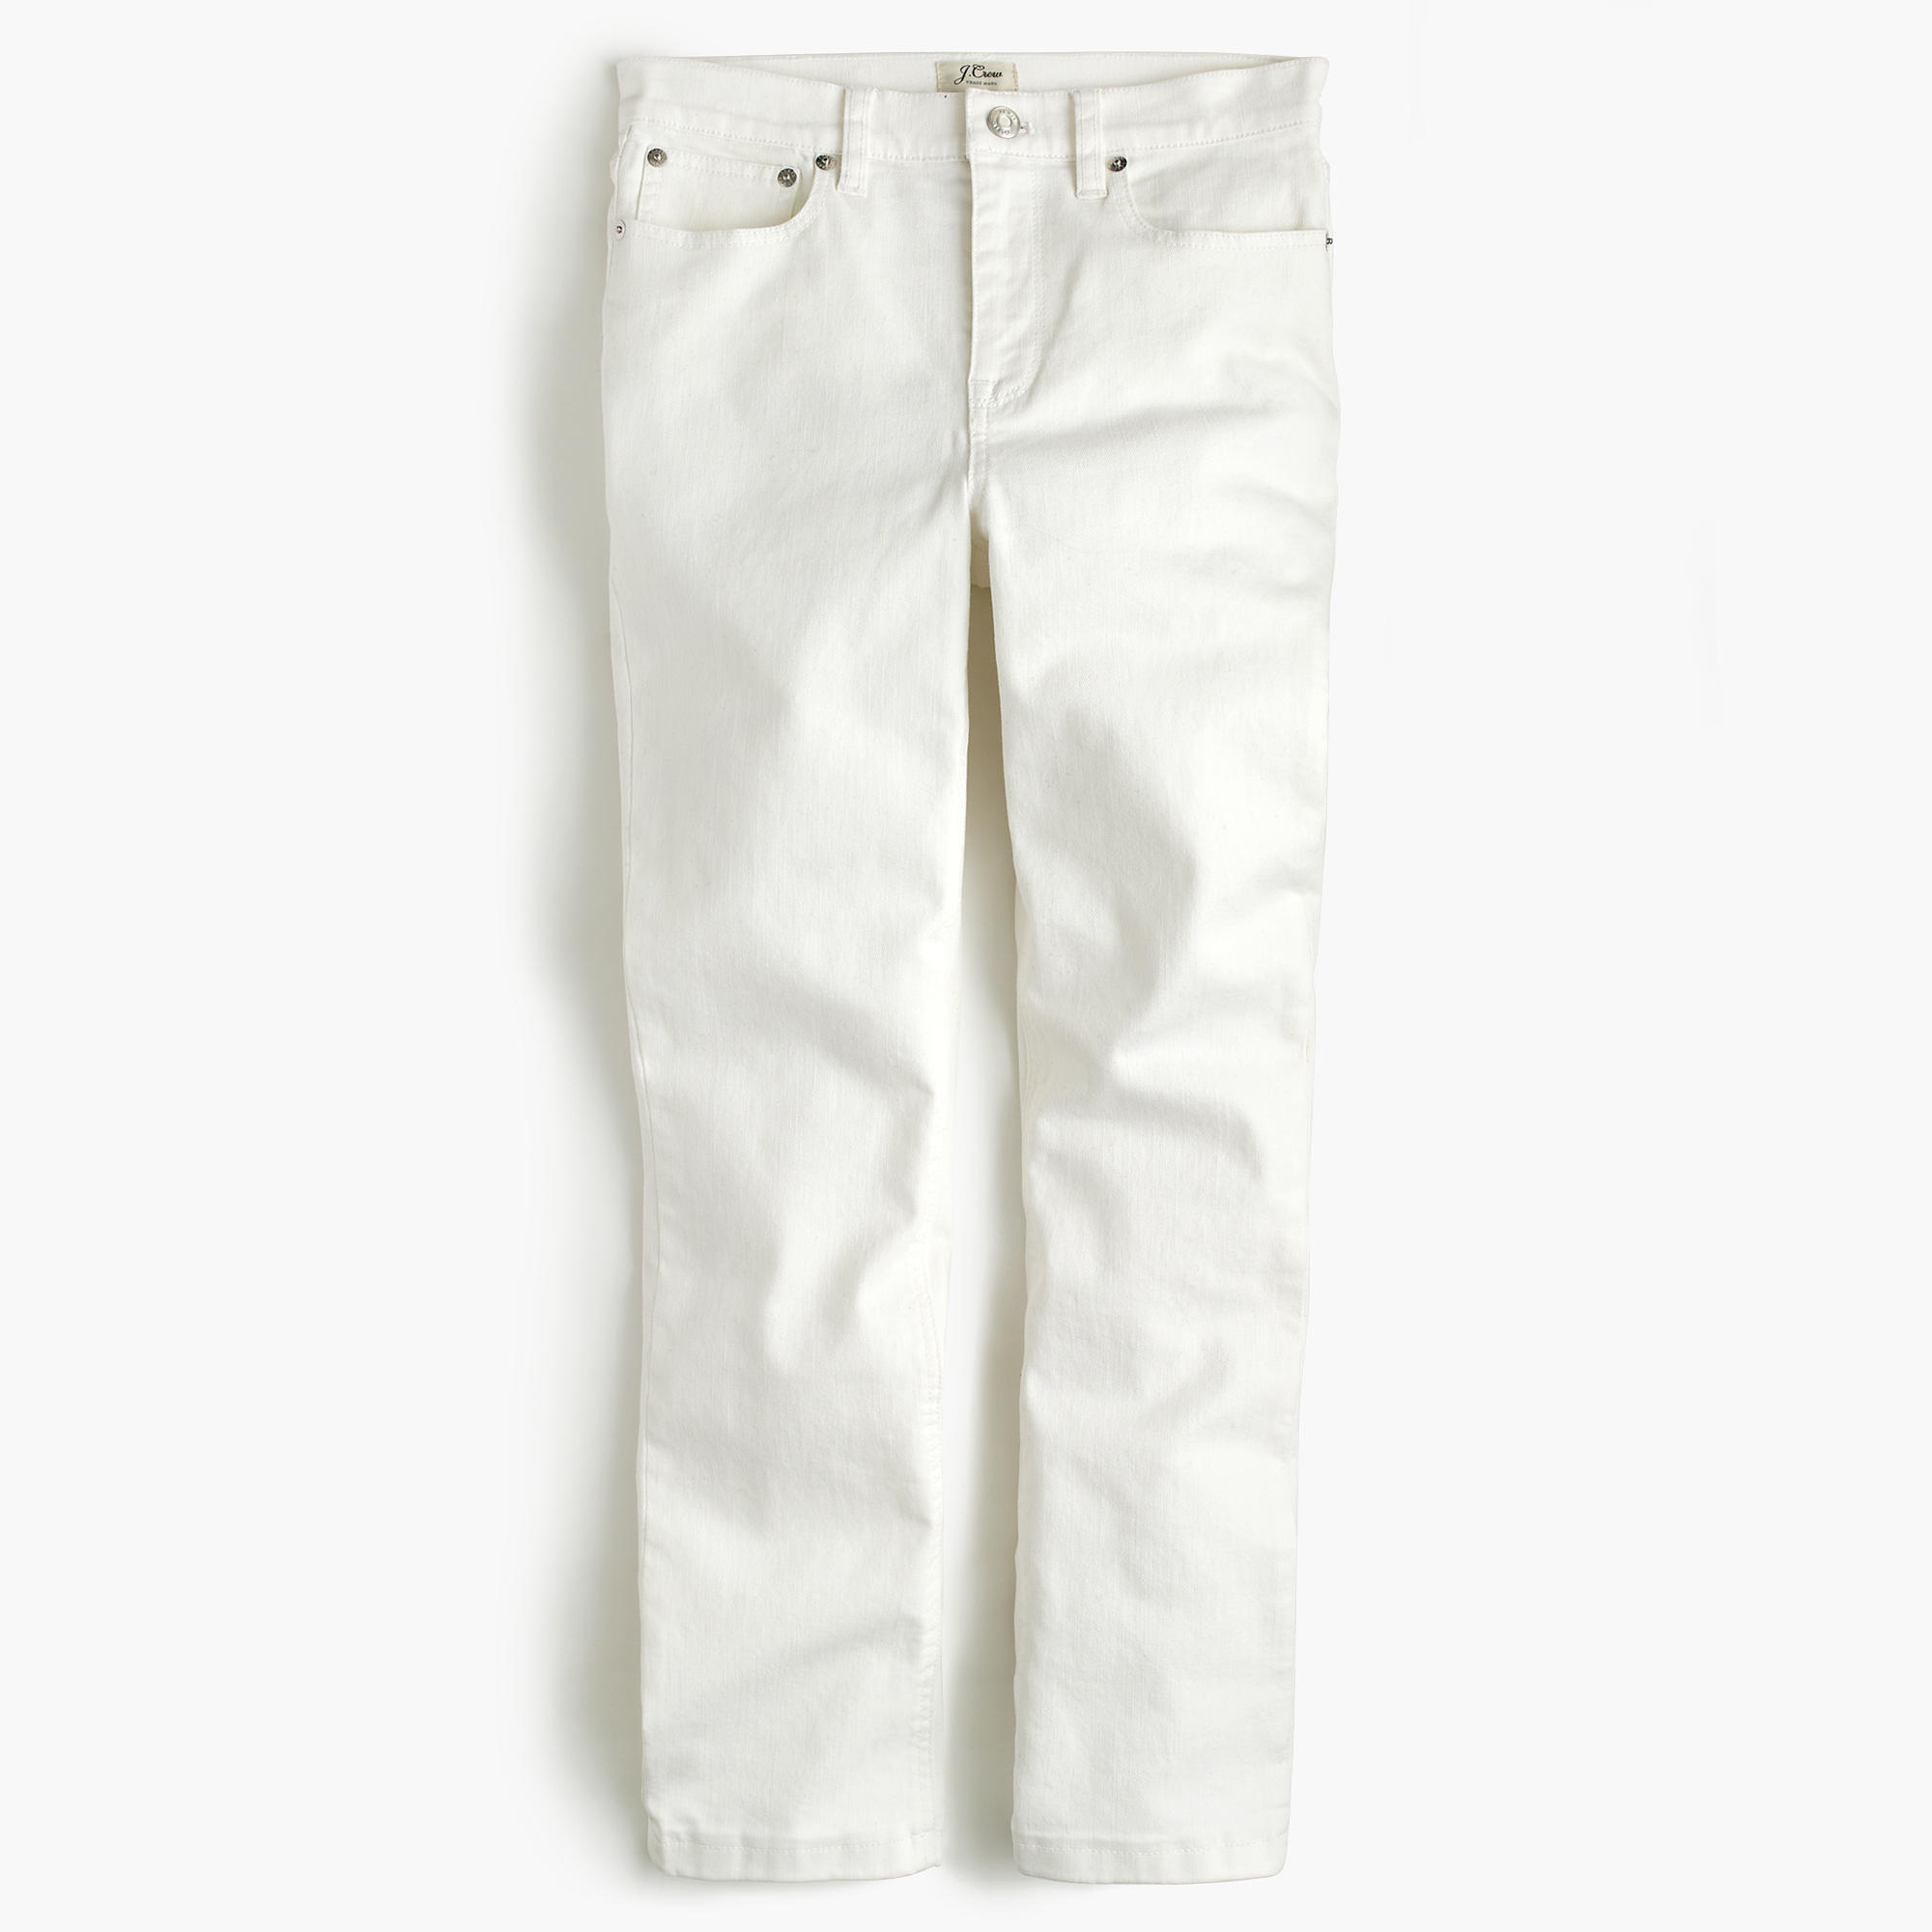 Cream Cropped Jeans